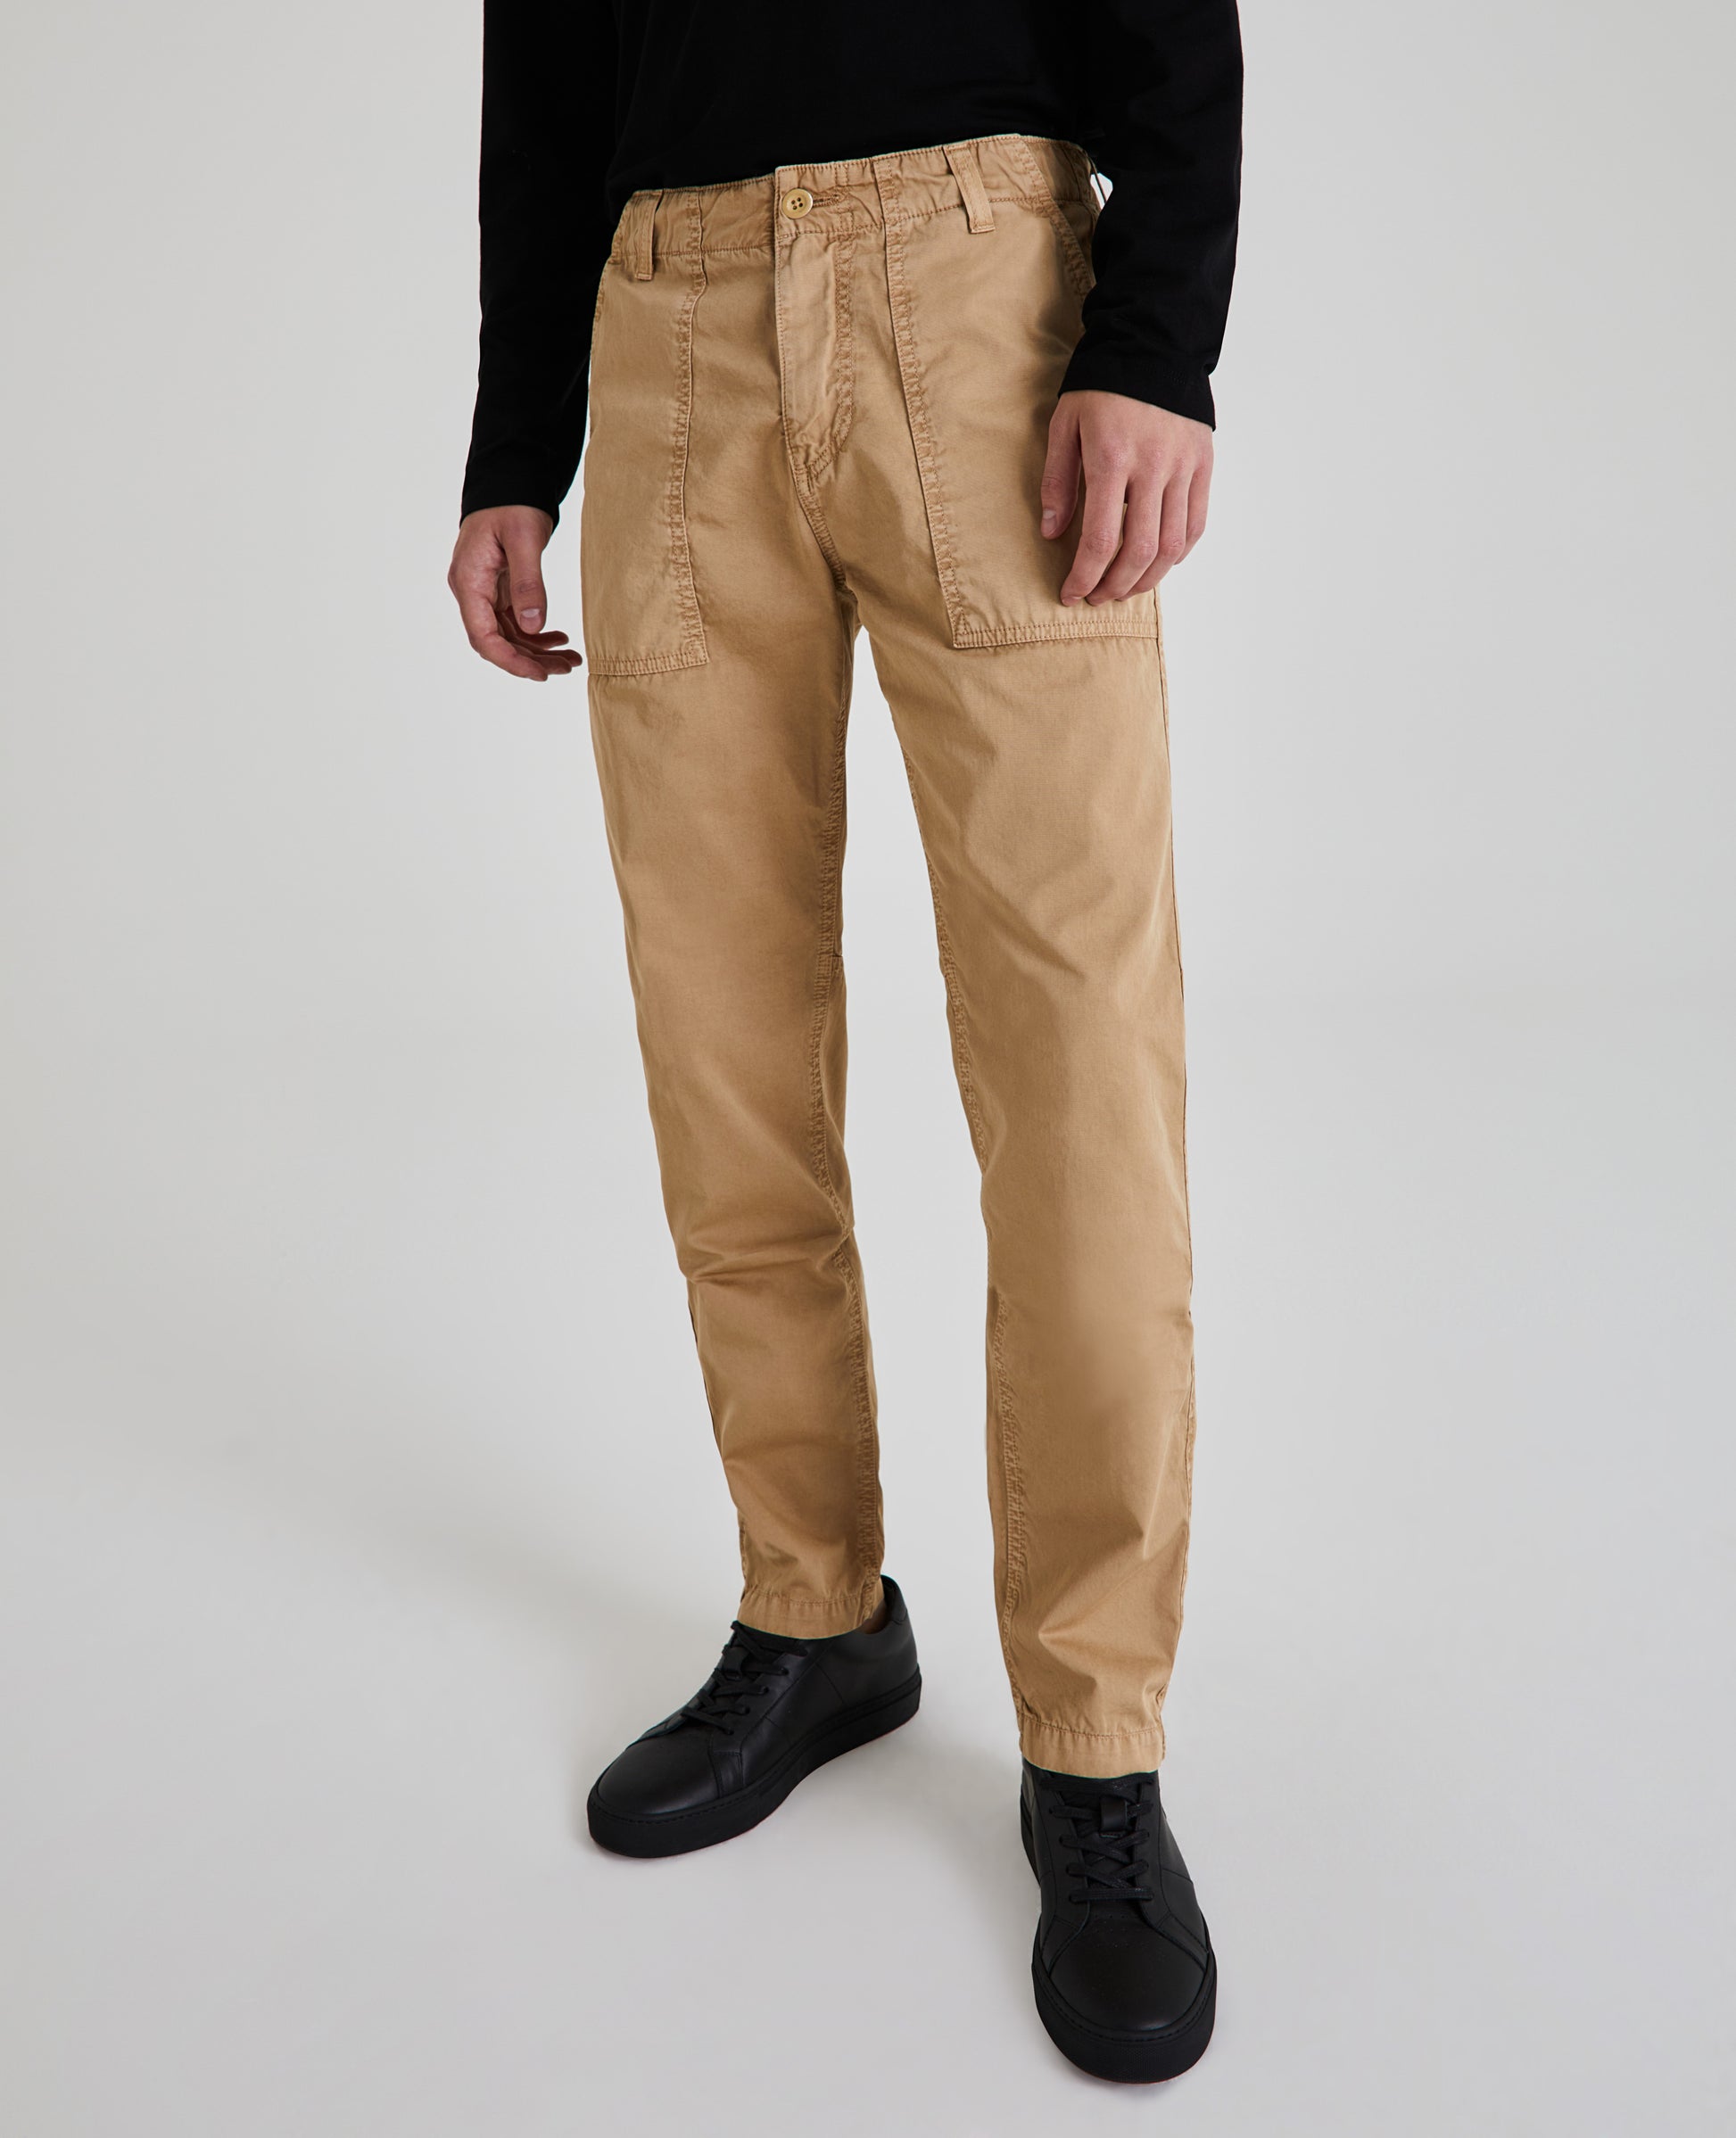 Clyfton Fatigue Sulfur Sandy Pail Relaxed Tapered Men Bottoms Photo 1